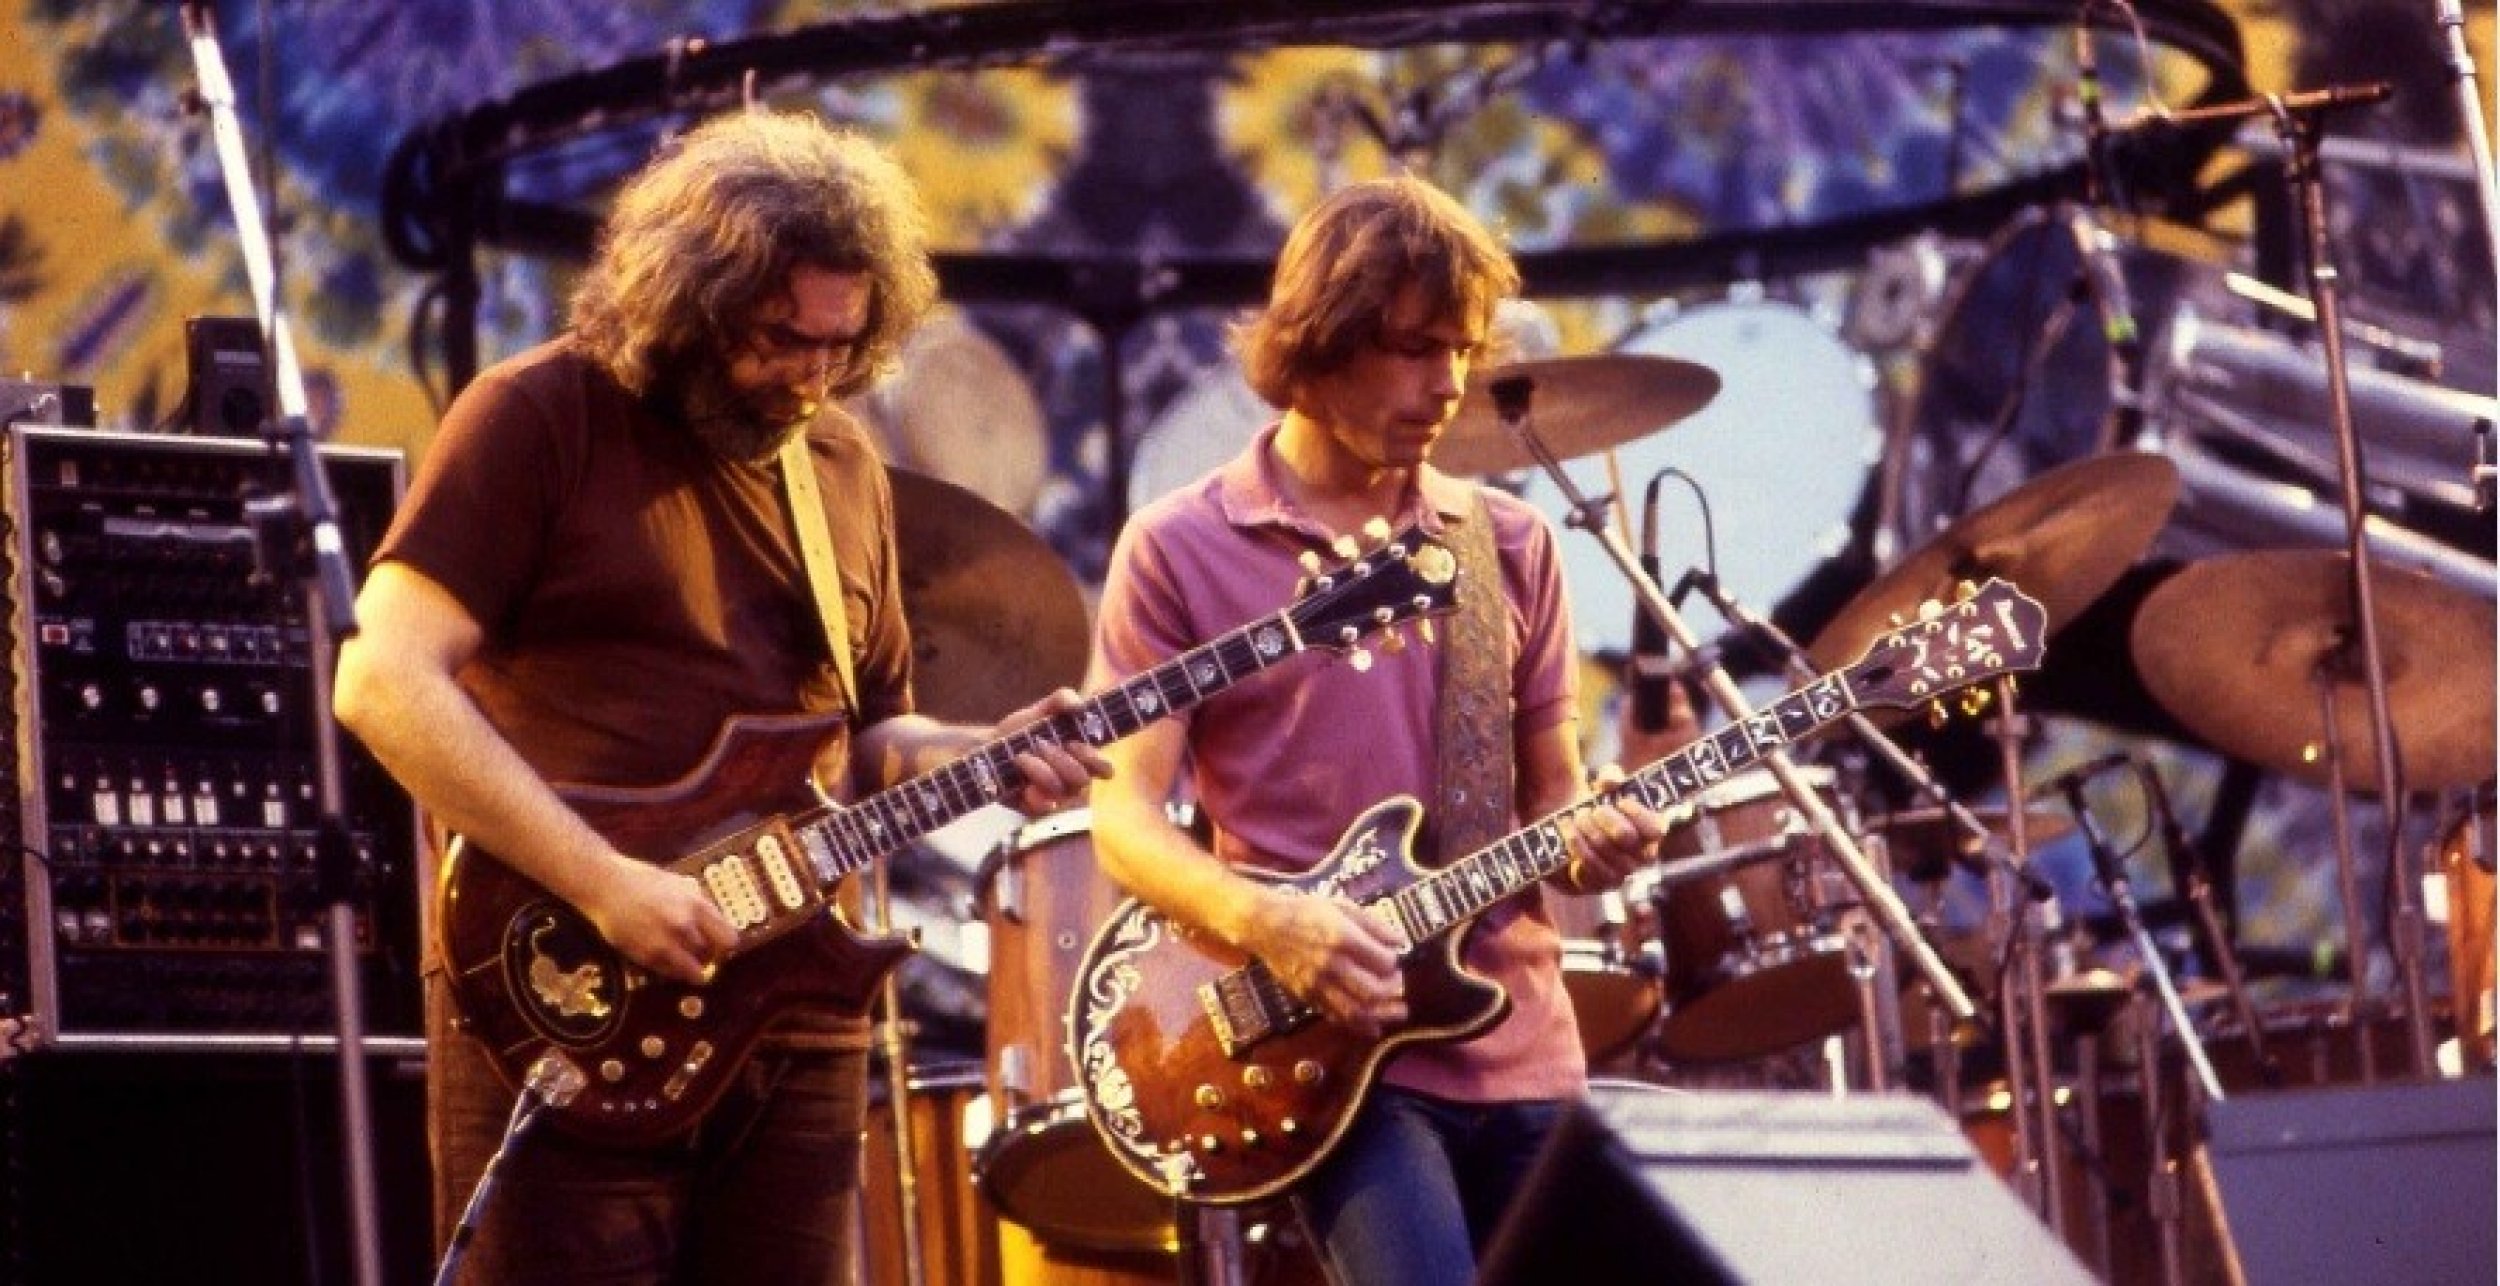 Jerry Garcia and Bob Weir of The Grateful Dead